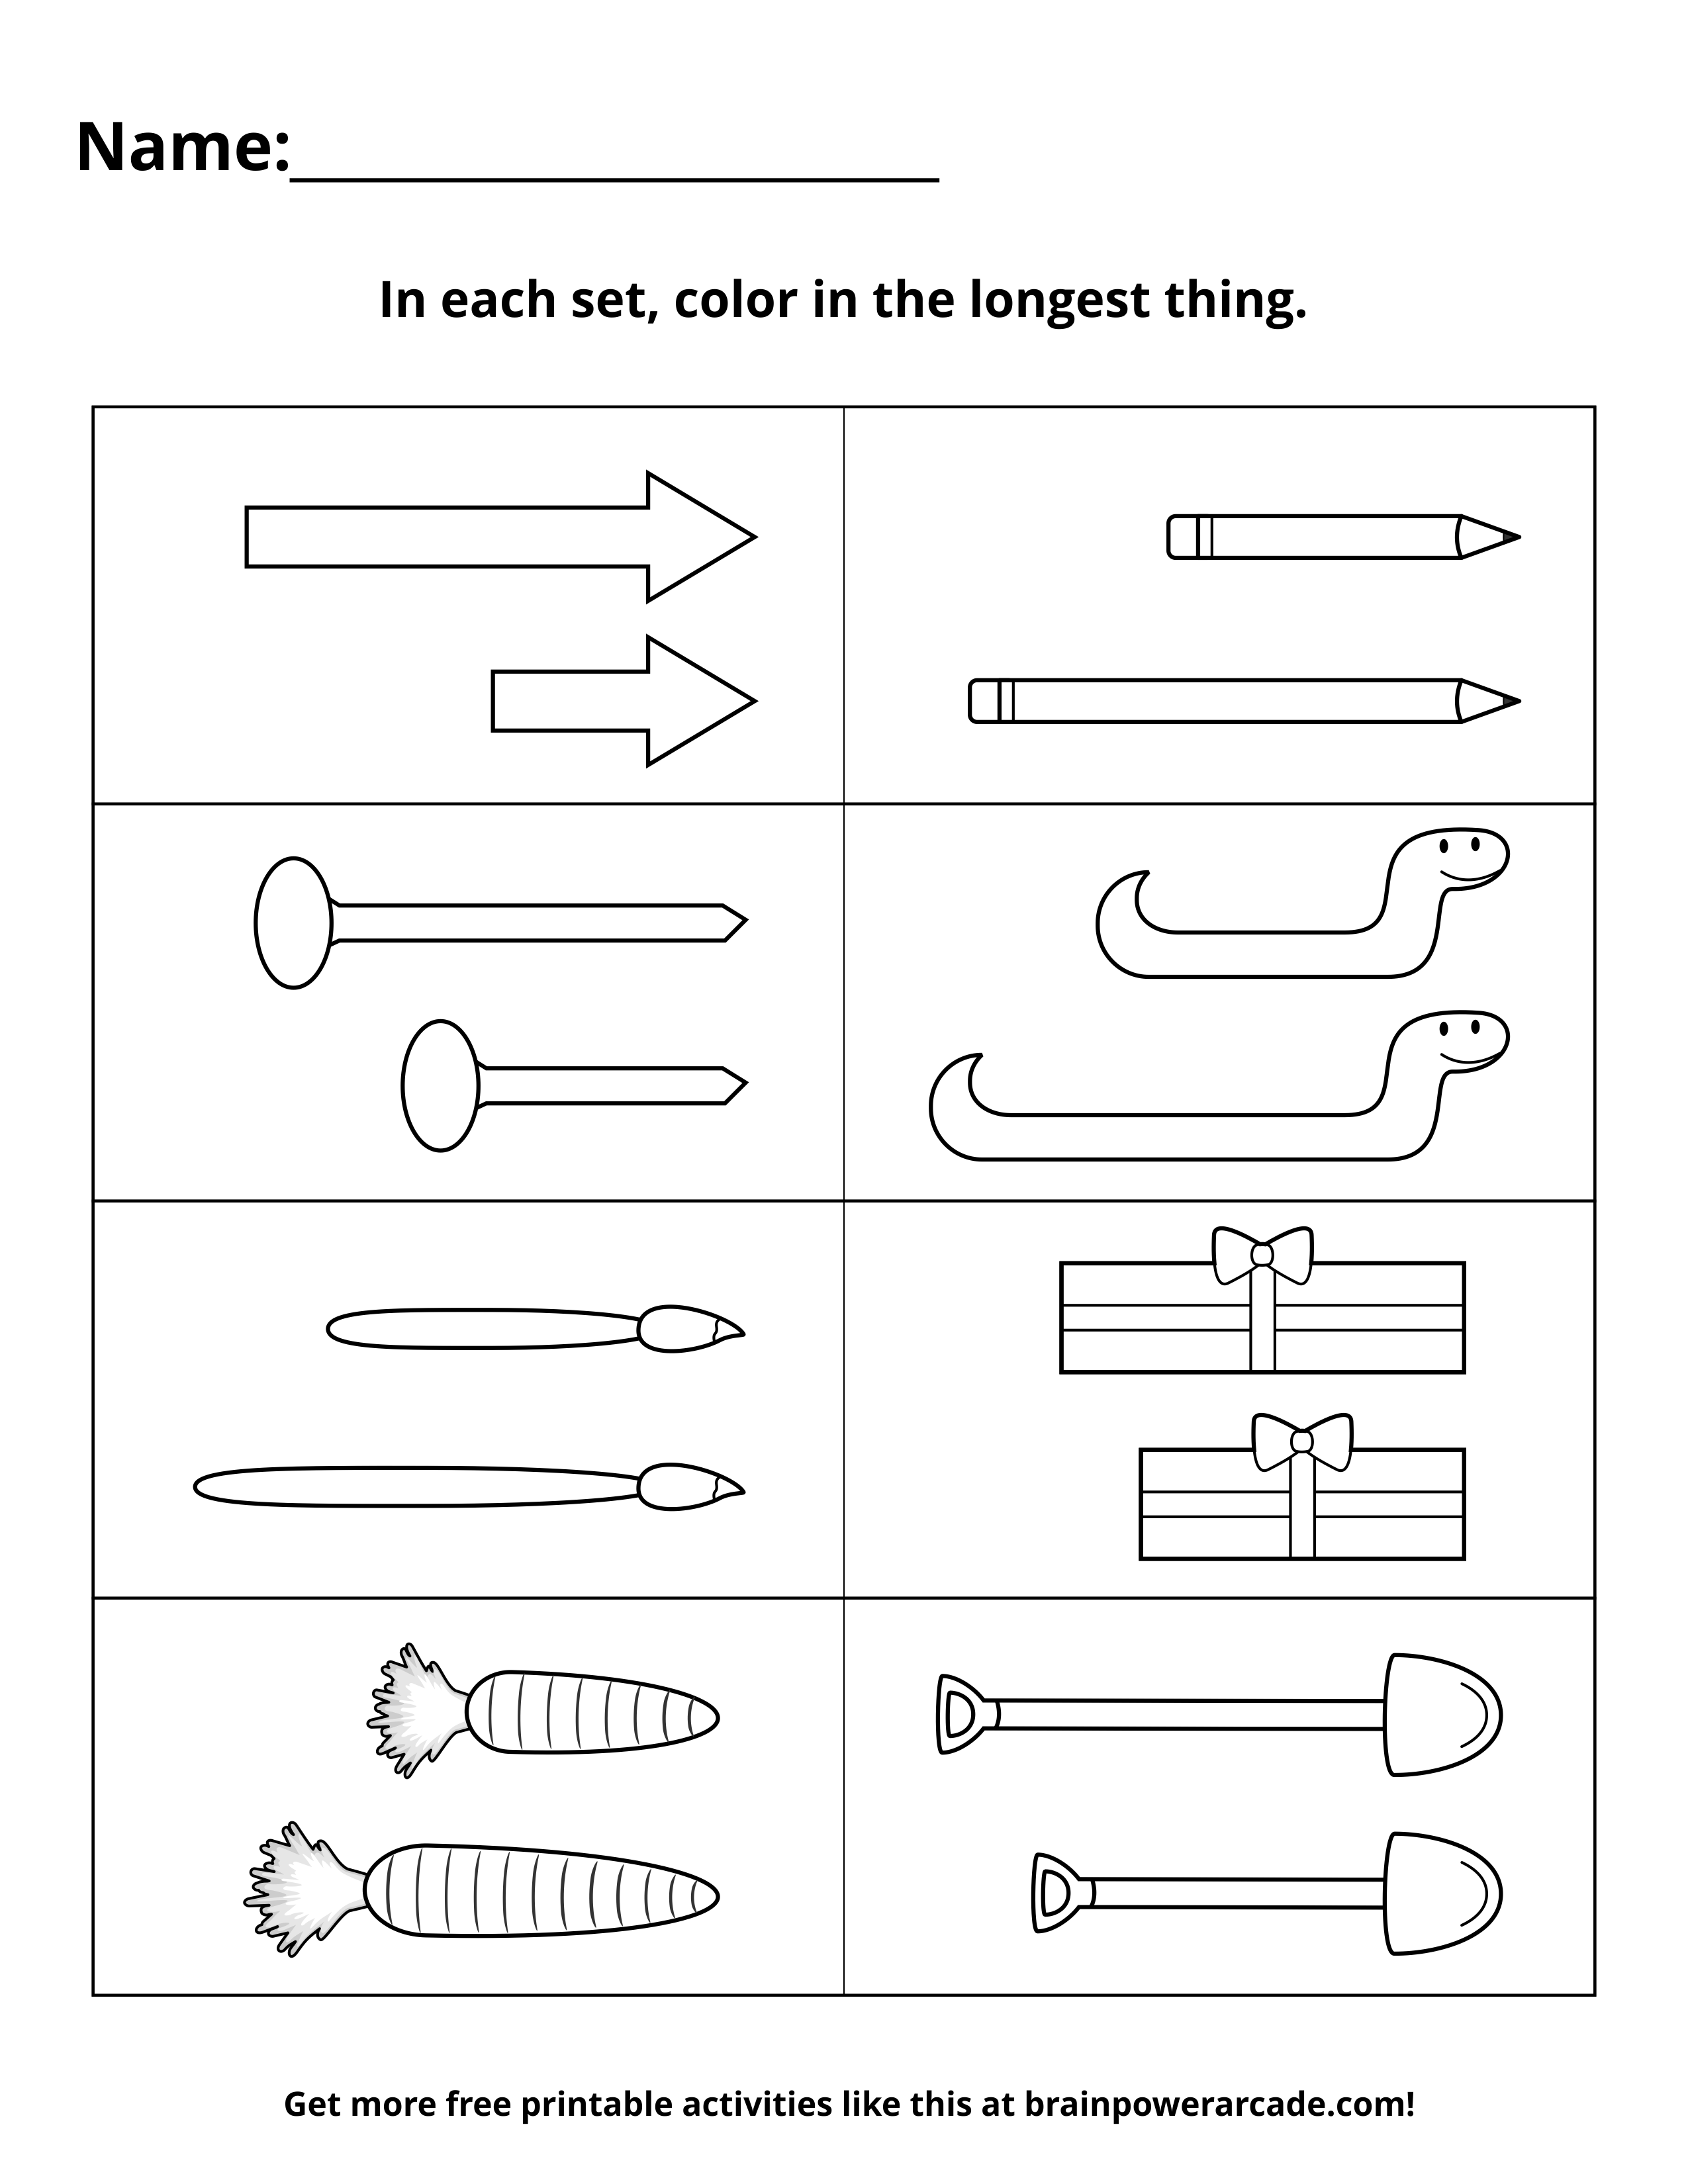 Find the Longest in Each Set